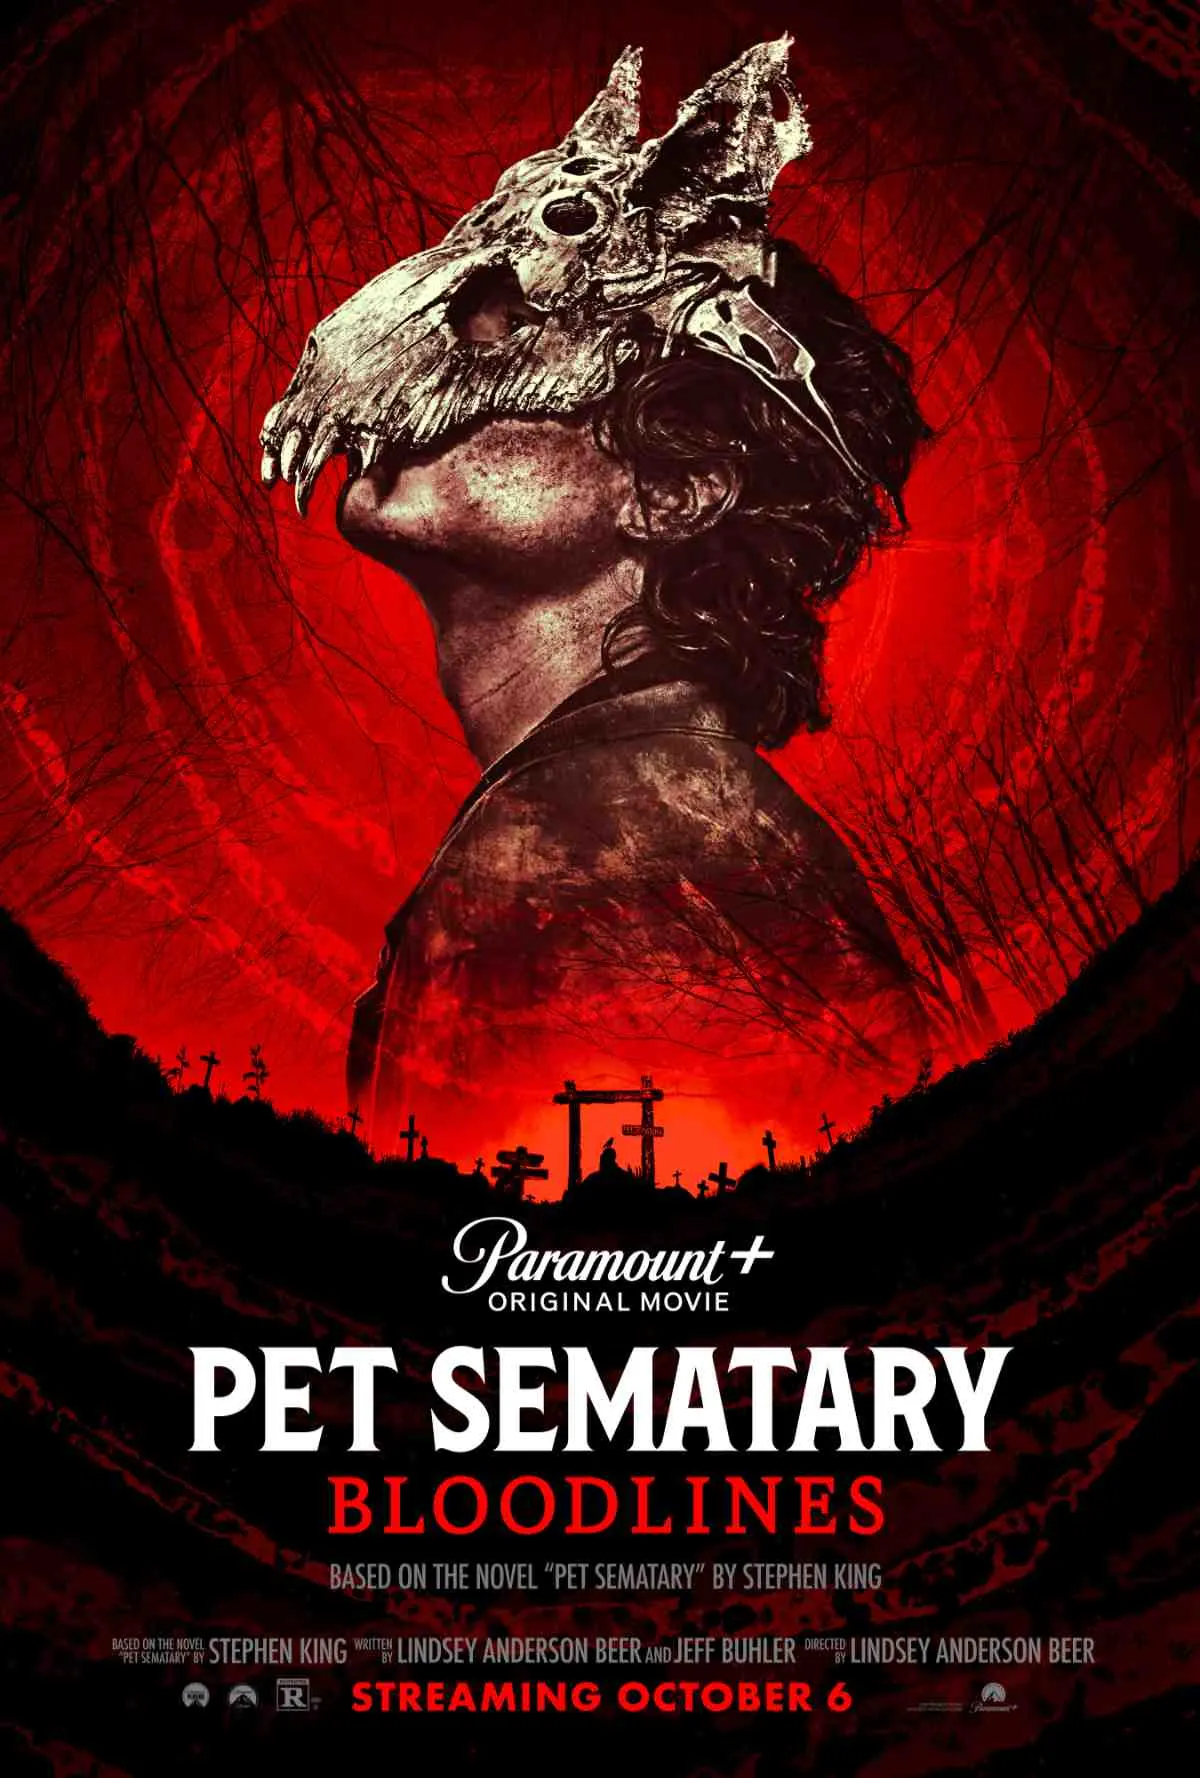 Pet Sematary: Bloodlines Trailer and Poster Debut